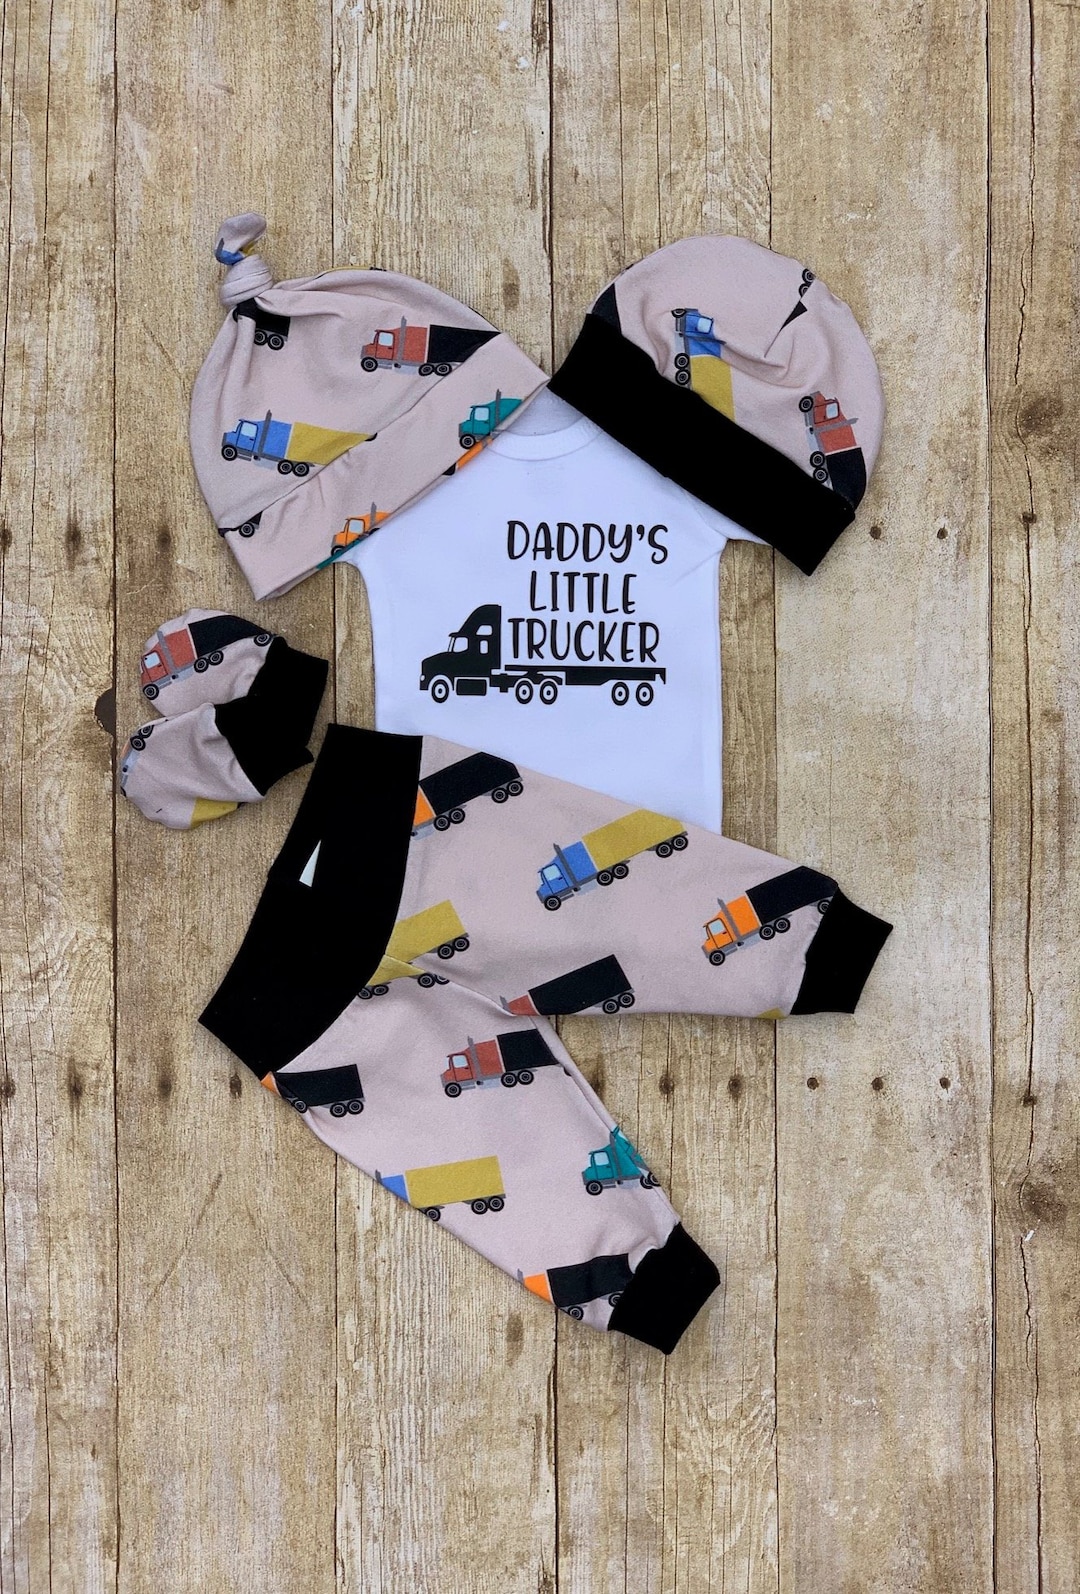 Daddy's Little Trucker Infant Outfit, Coming Home Baby Boy Outfit, Take  Home Newborn Outfit, Baby Boy Layette, Truck Driver, Baby Shower 